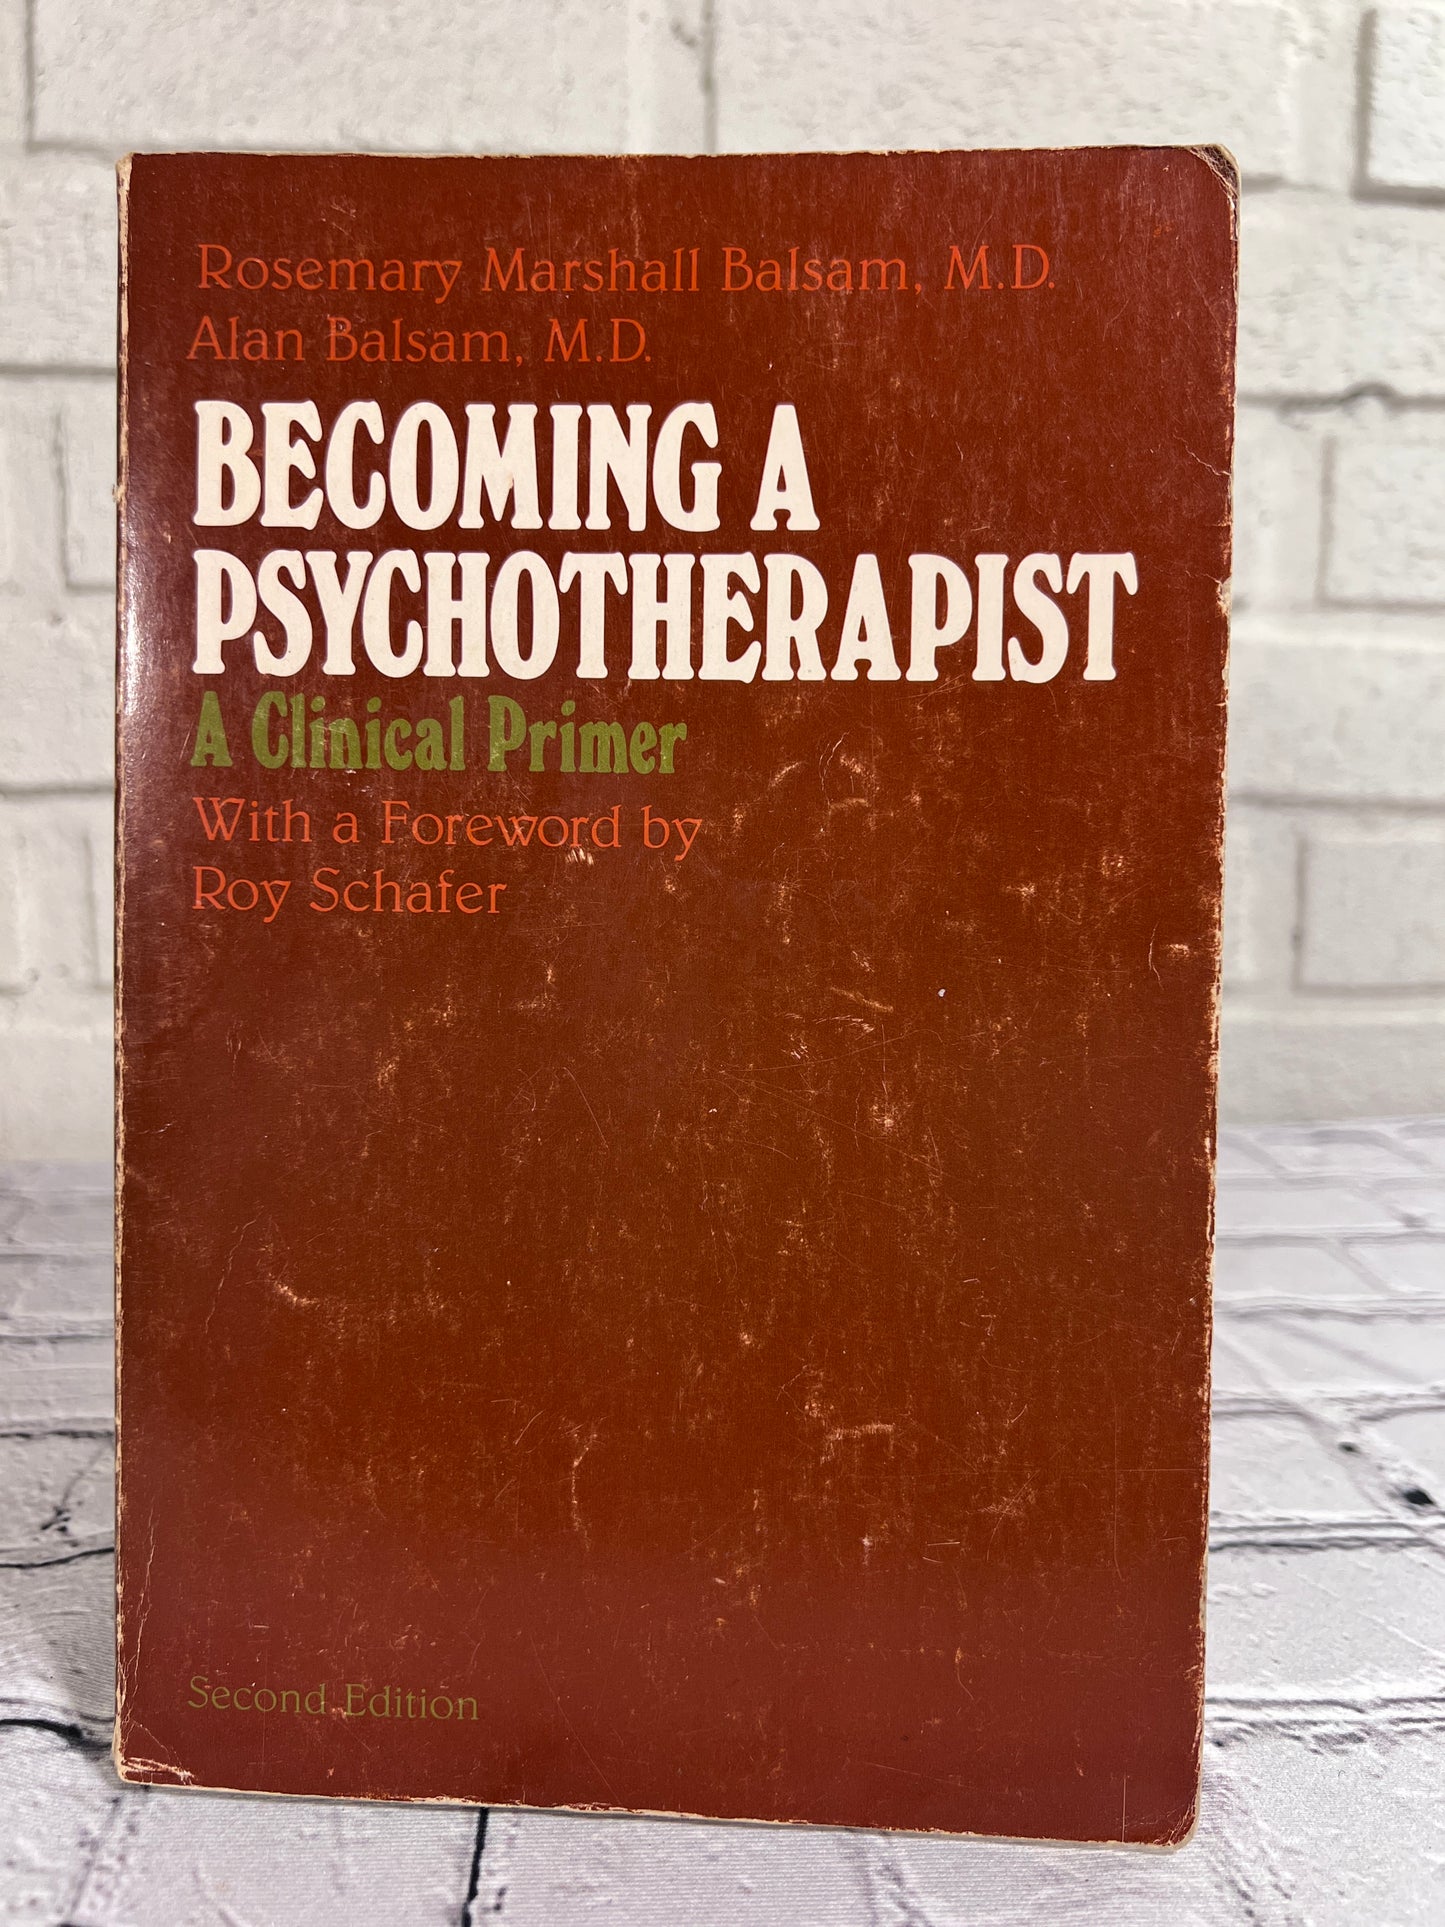 Becoming a Psychotherapist: A Clinical Primer by Rosemary Marshall Balsam, Alan Balsam